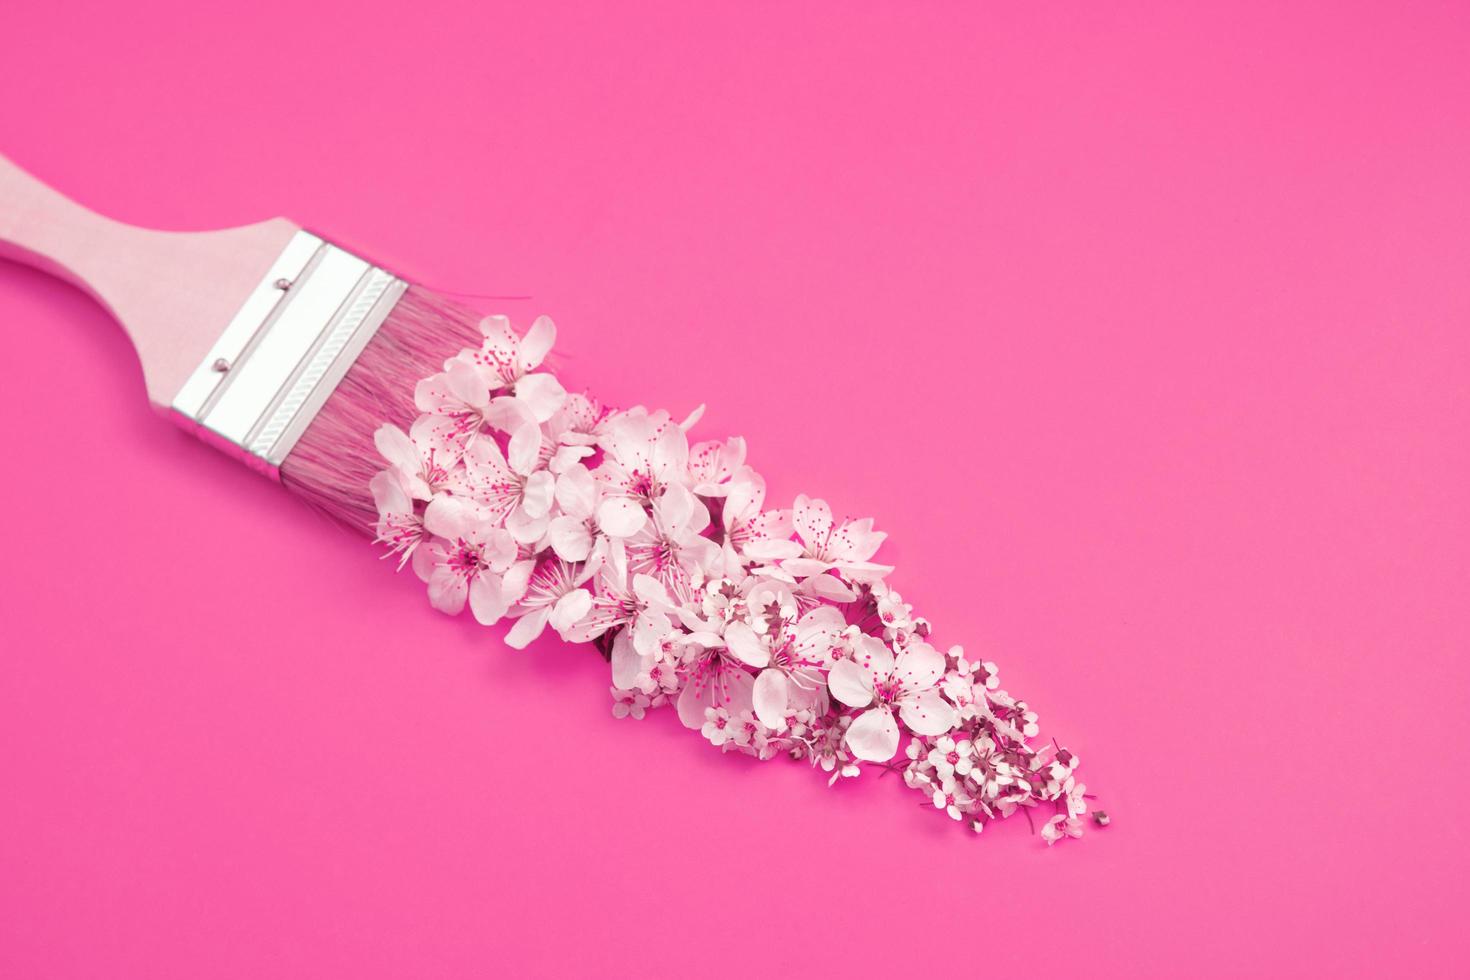 Brush with white flowers on pink background. Spring magic creative concept photo